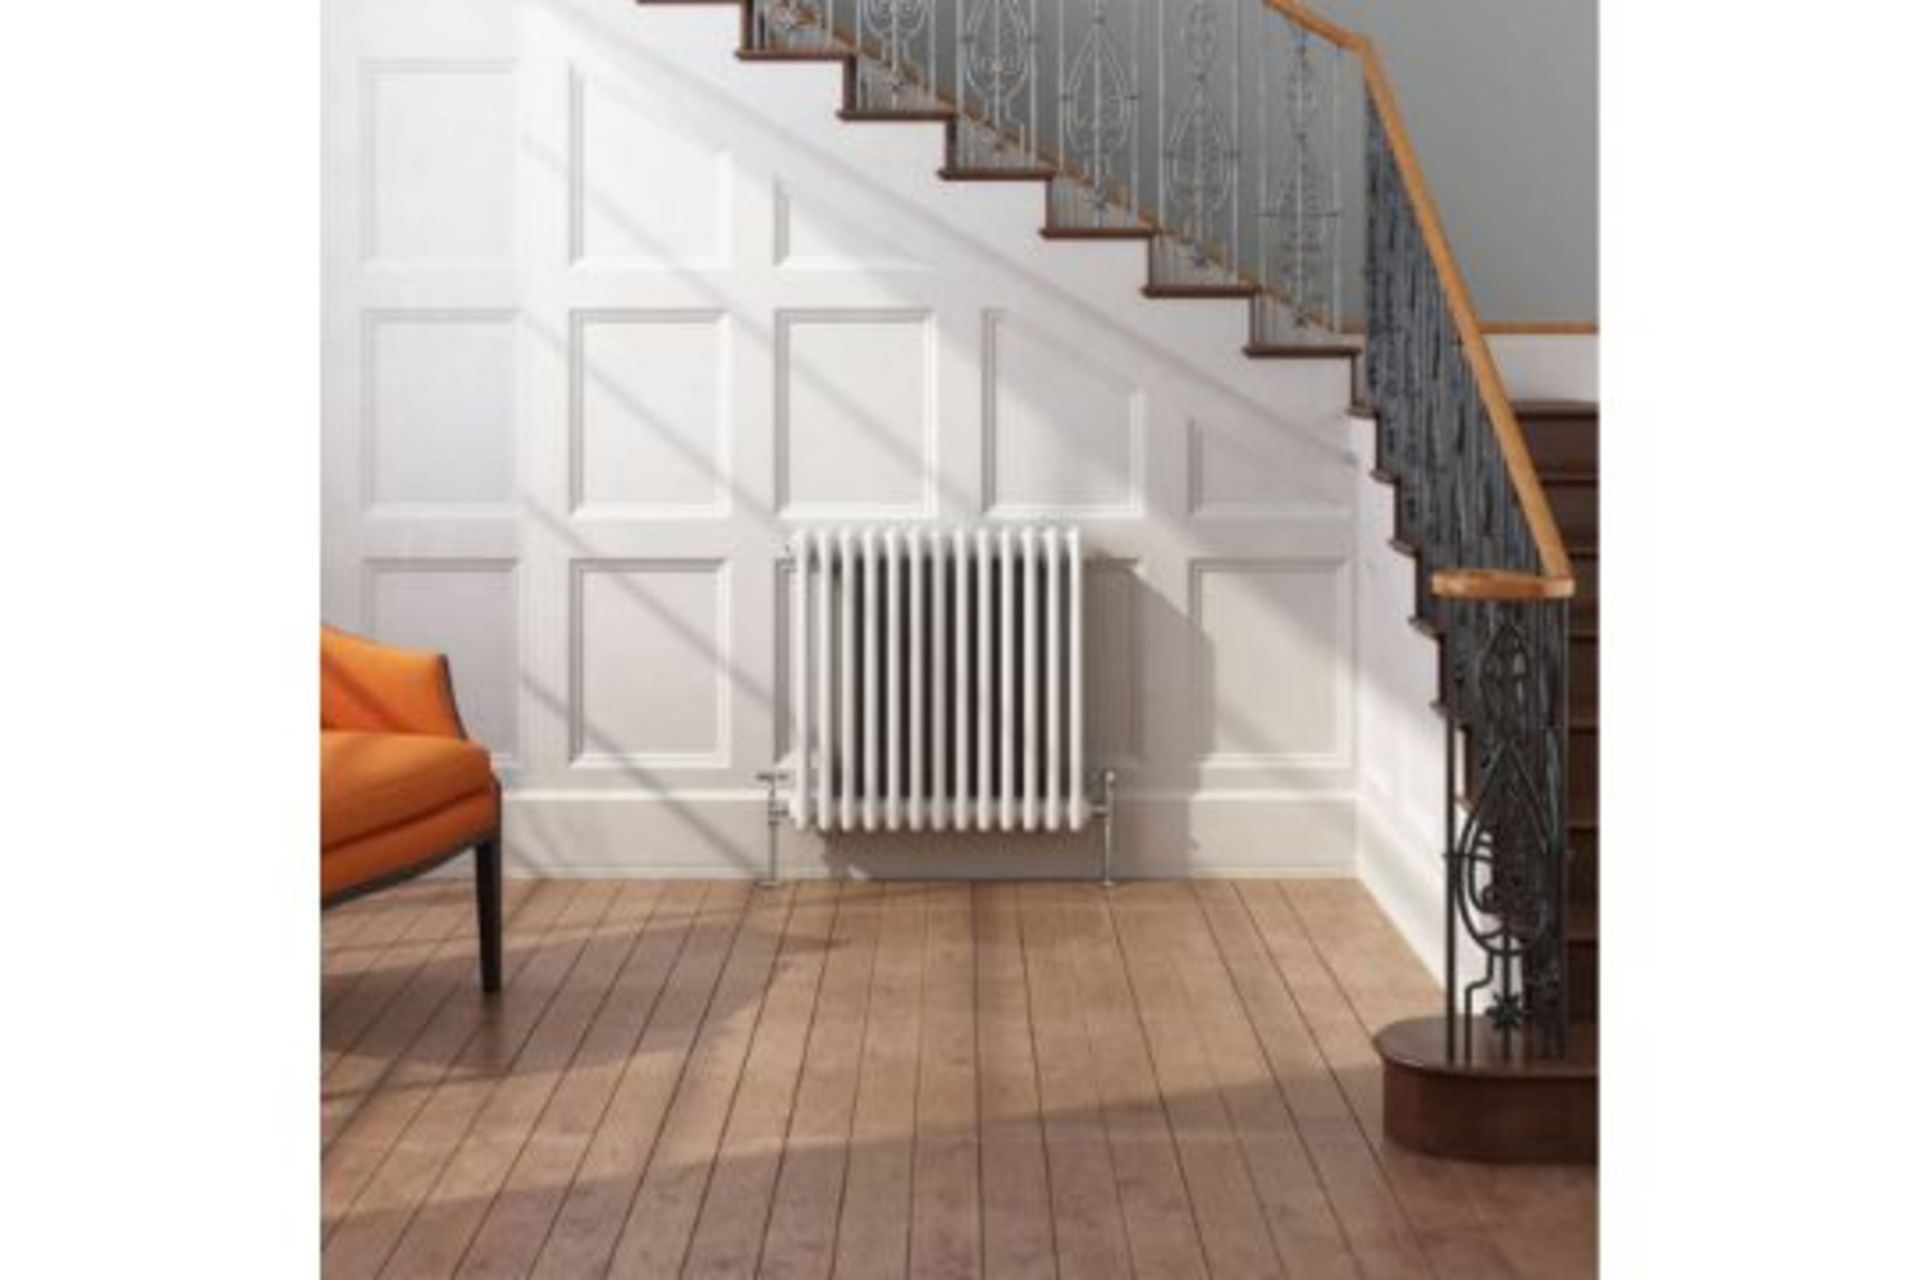 New 600x603mm White Double Panel Horizontal Colosseum Traditional Radiator. Rrp £395.99 Eac... - Image 2 of 2